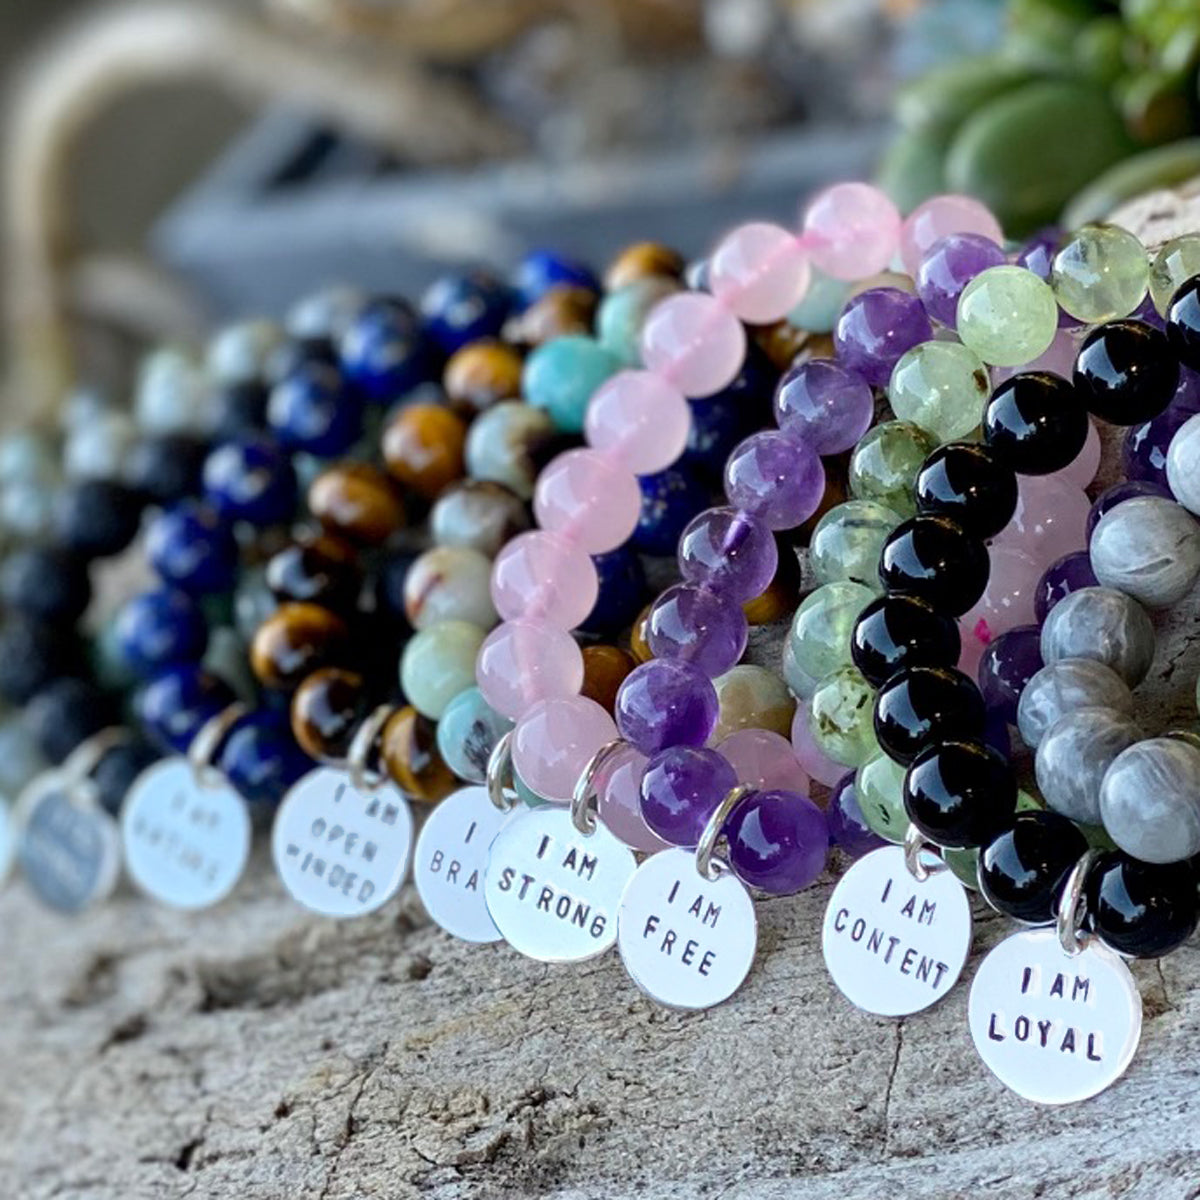 Why Wearing Affirmations and Empowering Jewelry Should Be Your New Year's Resolution